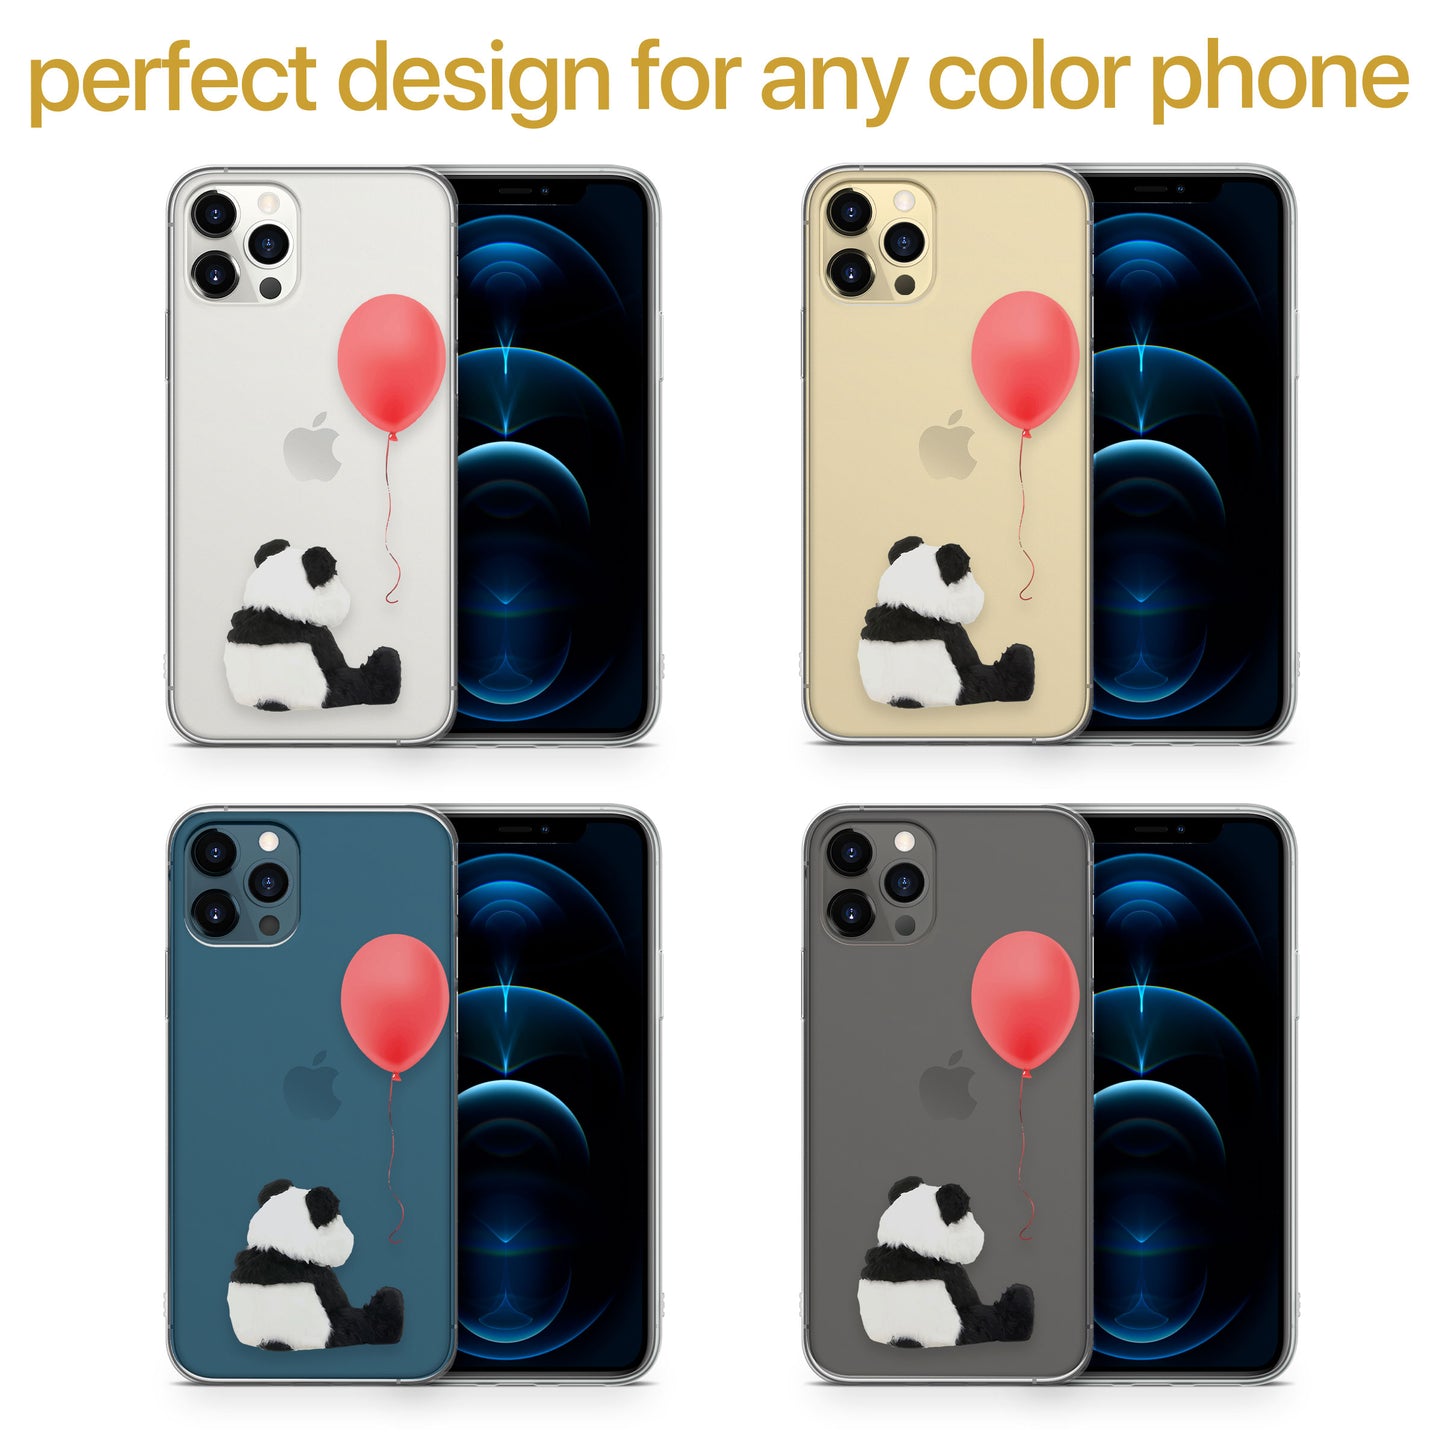 TPU Case Clear case with (Sad Panda) Design for iPhone & Samsung Phones